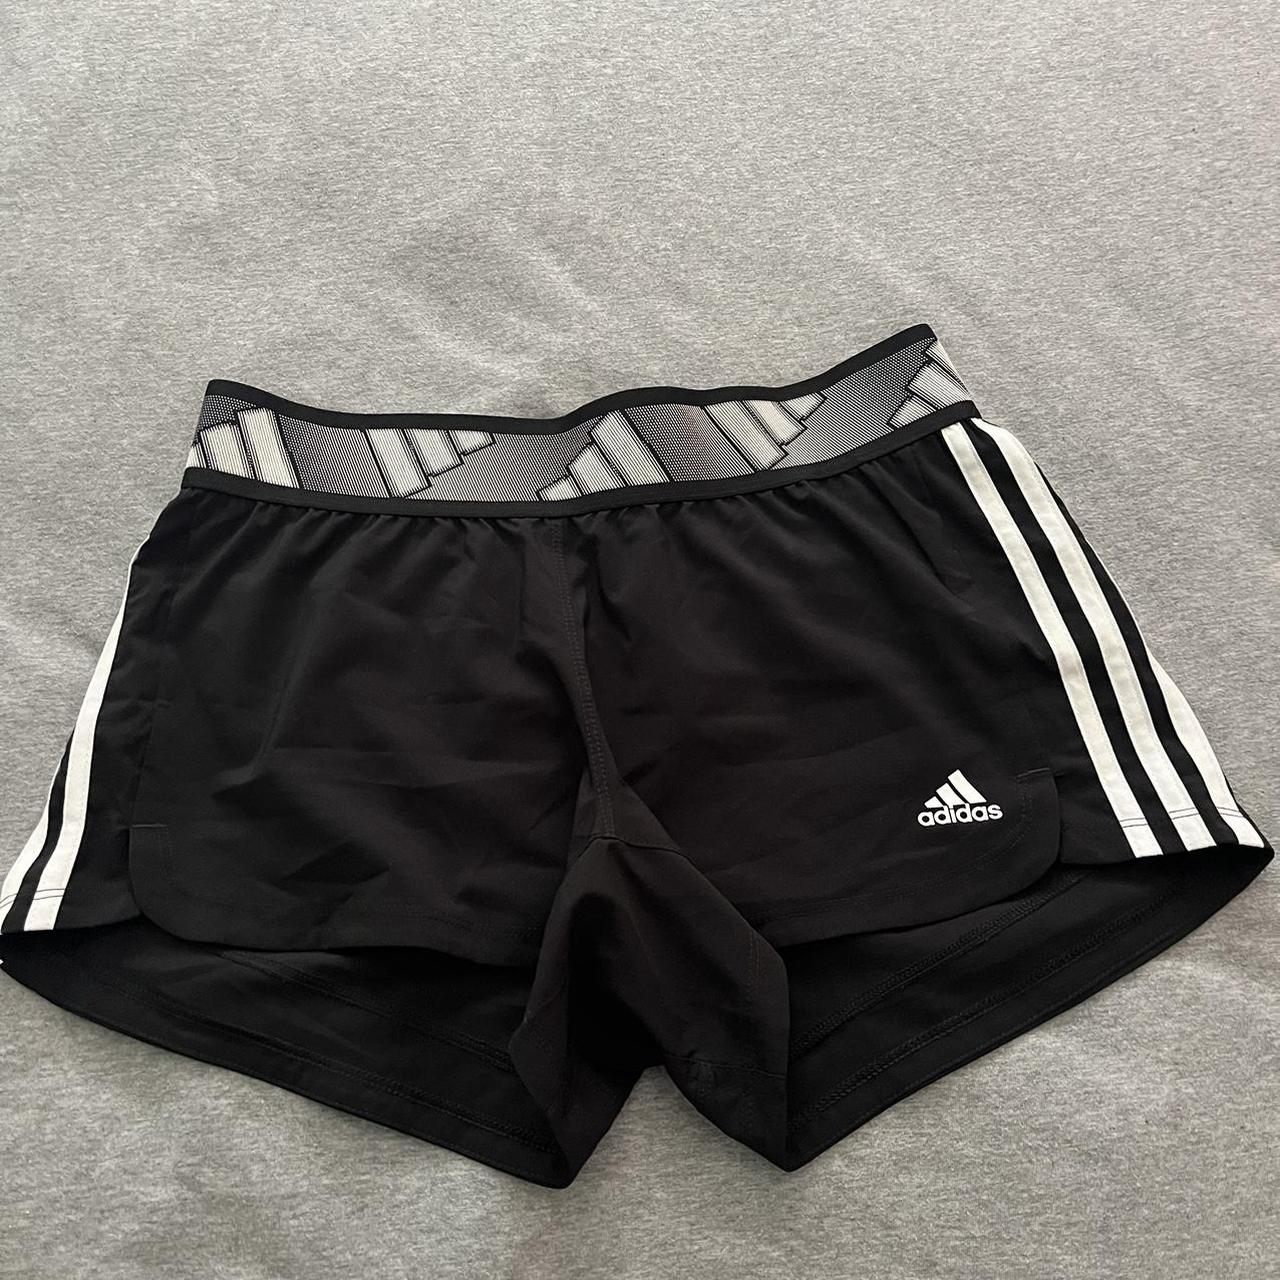 Adidas work out shorts - Depop